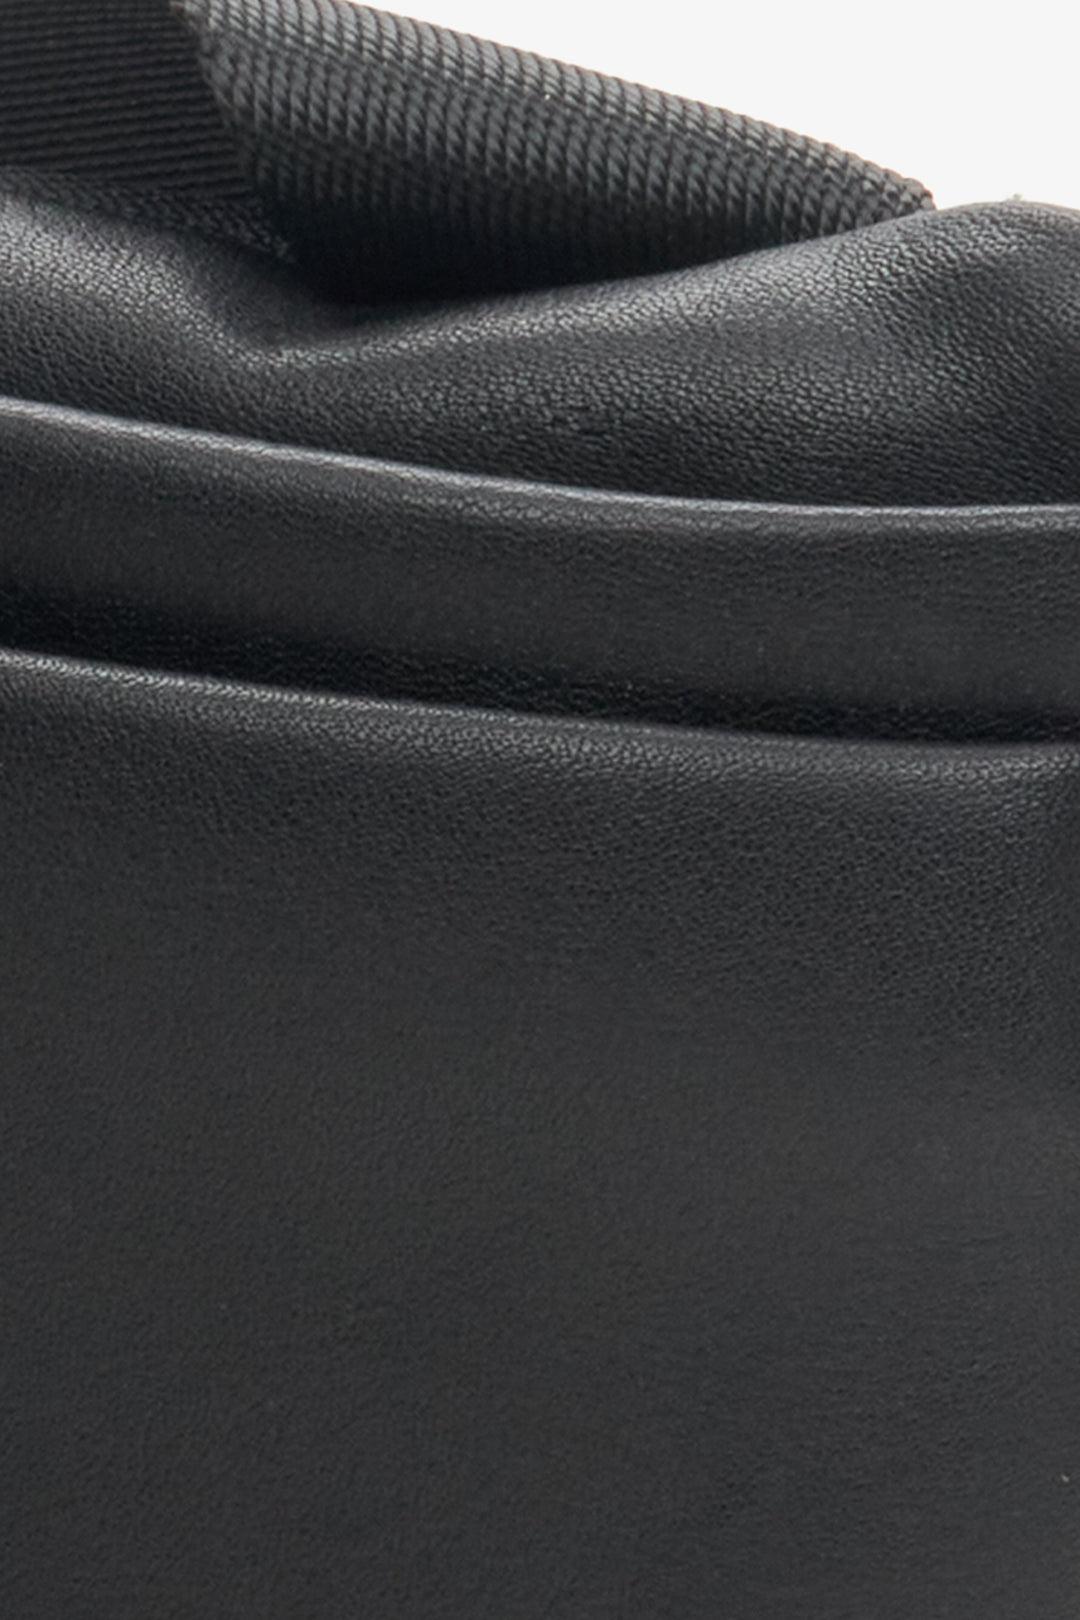 Men's  black waist bag made of genuine leather by Estro - close-up on the detail.